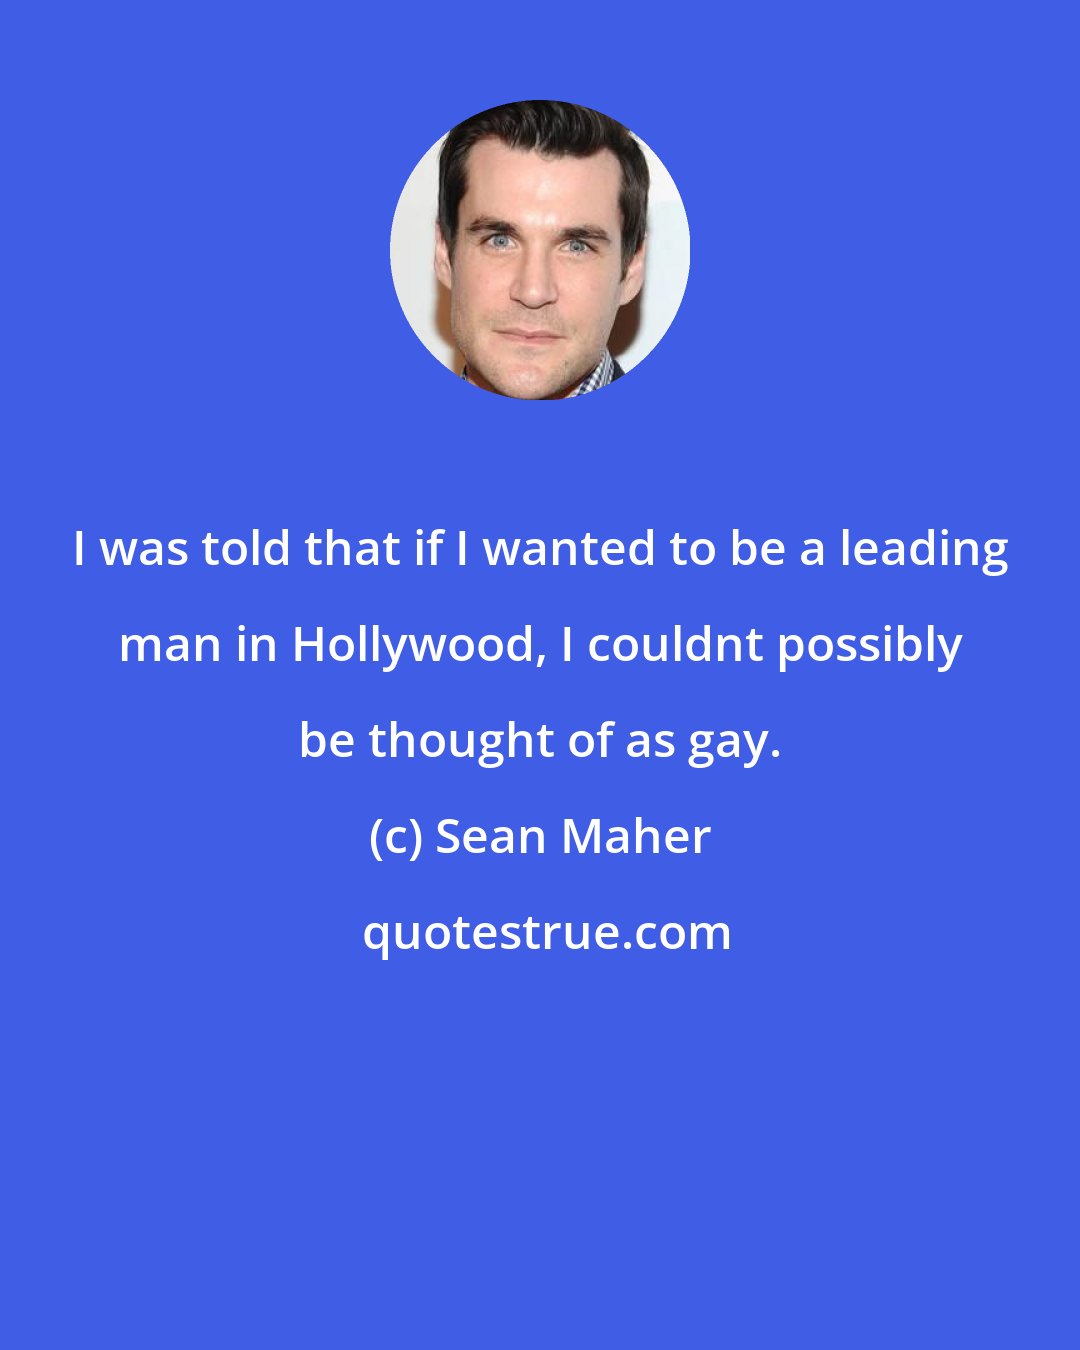 Sean Maher: I was told that if I wanted to be a leading man in Hollywood, I couldnt possibly be thought of as gay.